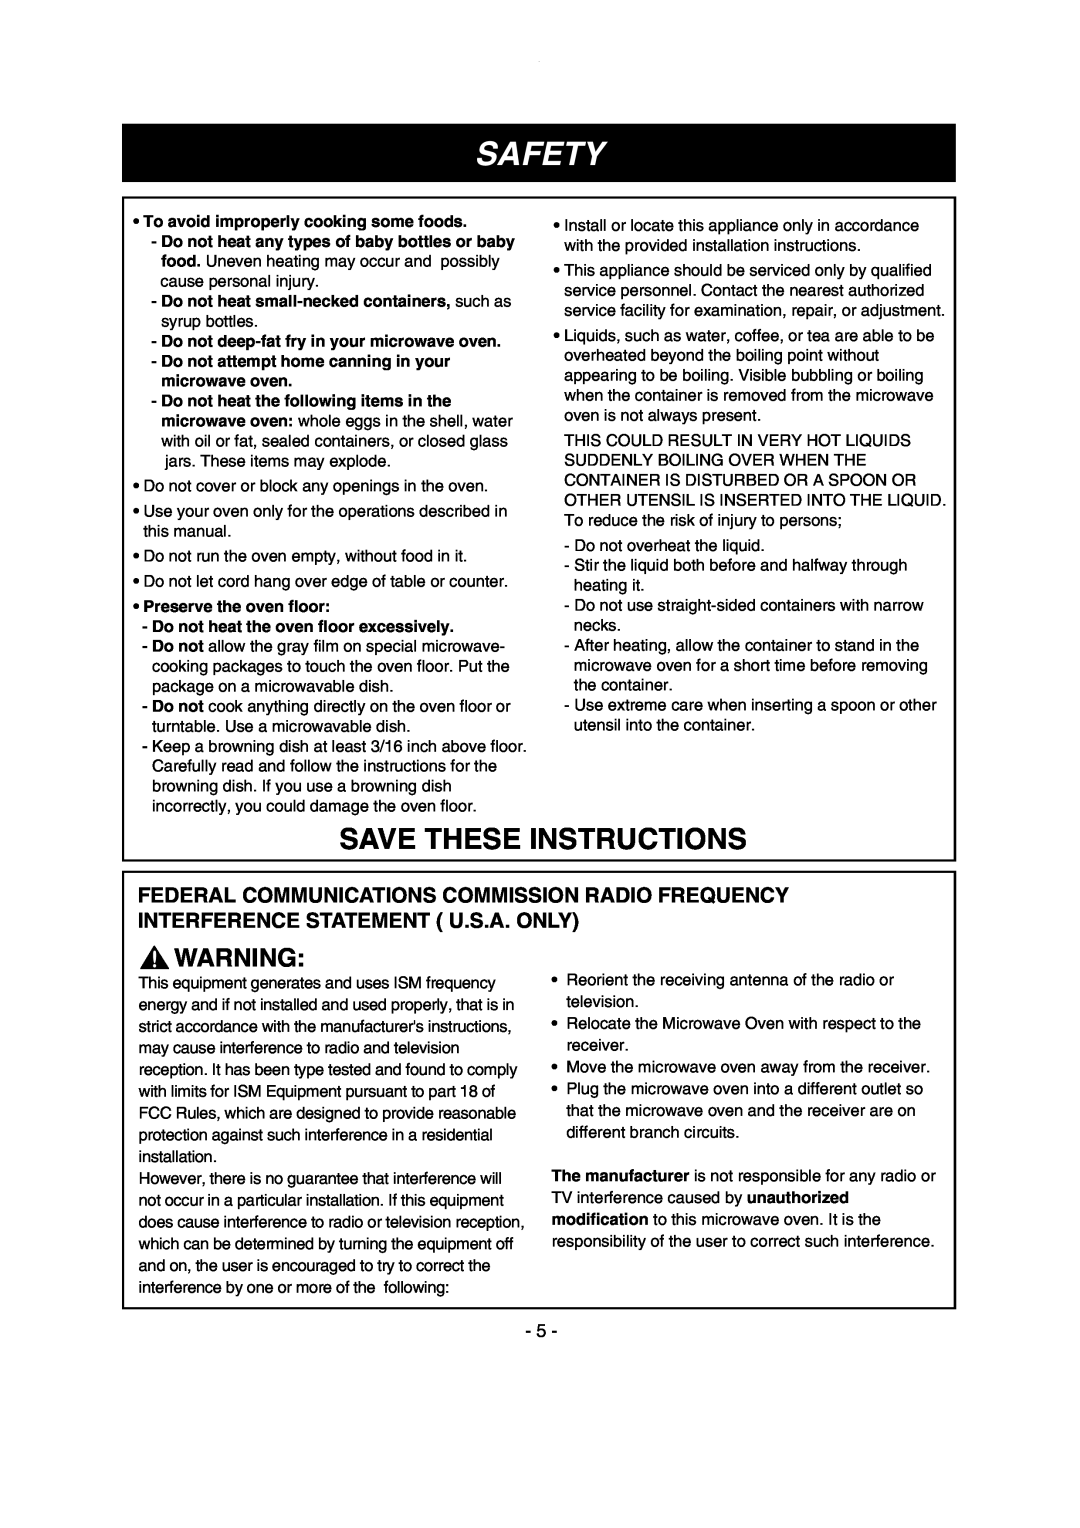 LG Electronics LMV1635SBQ Save These Instructions, Safety, To avoid improperly cooking some foods, Preserve the oven floor 